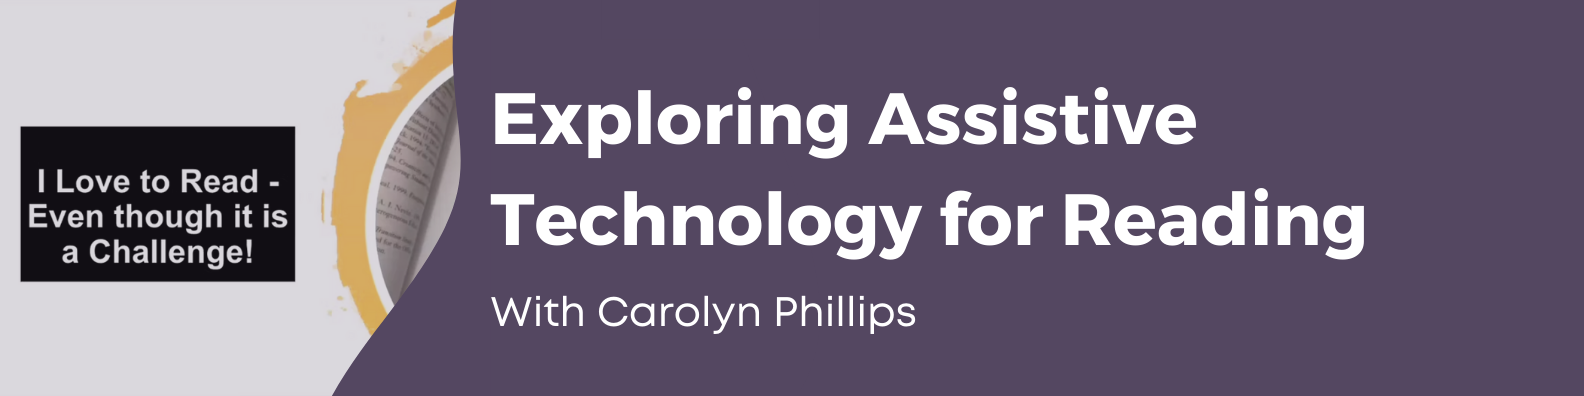 Exploring Assistive Technology for Reading with Carolyn Phillips